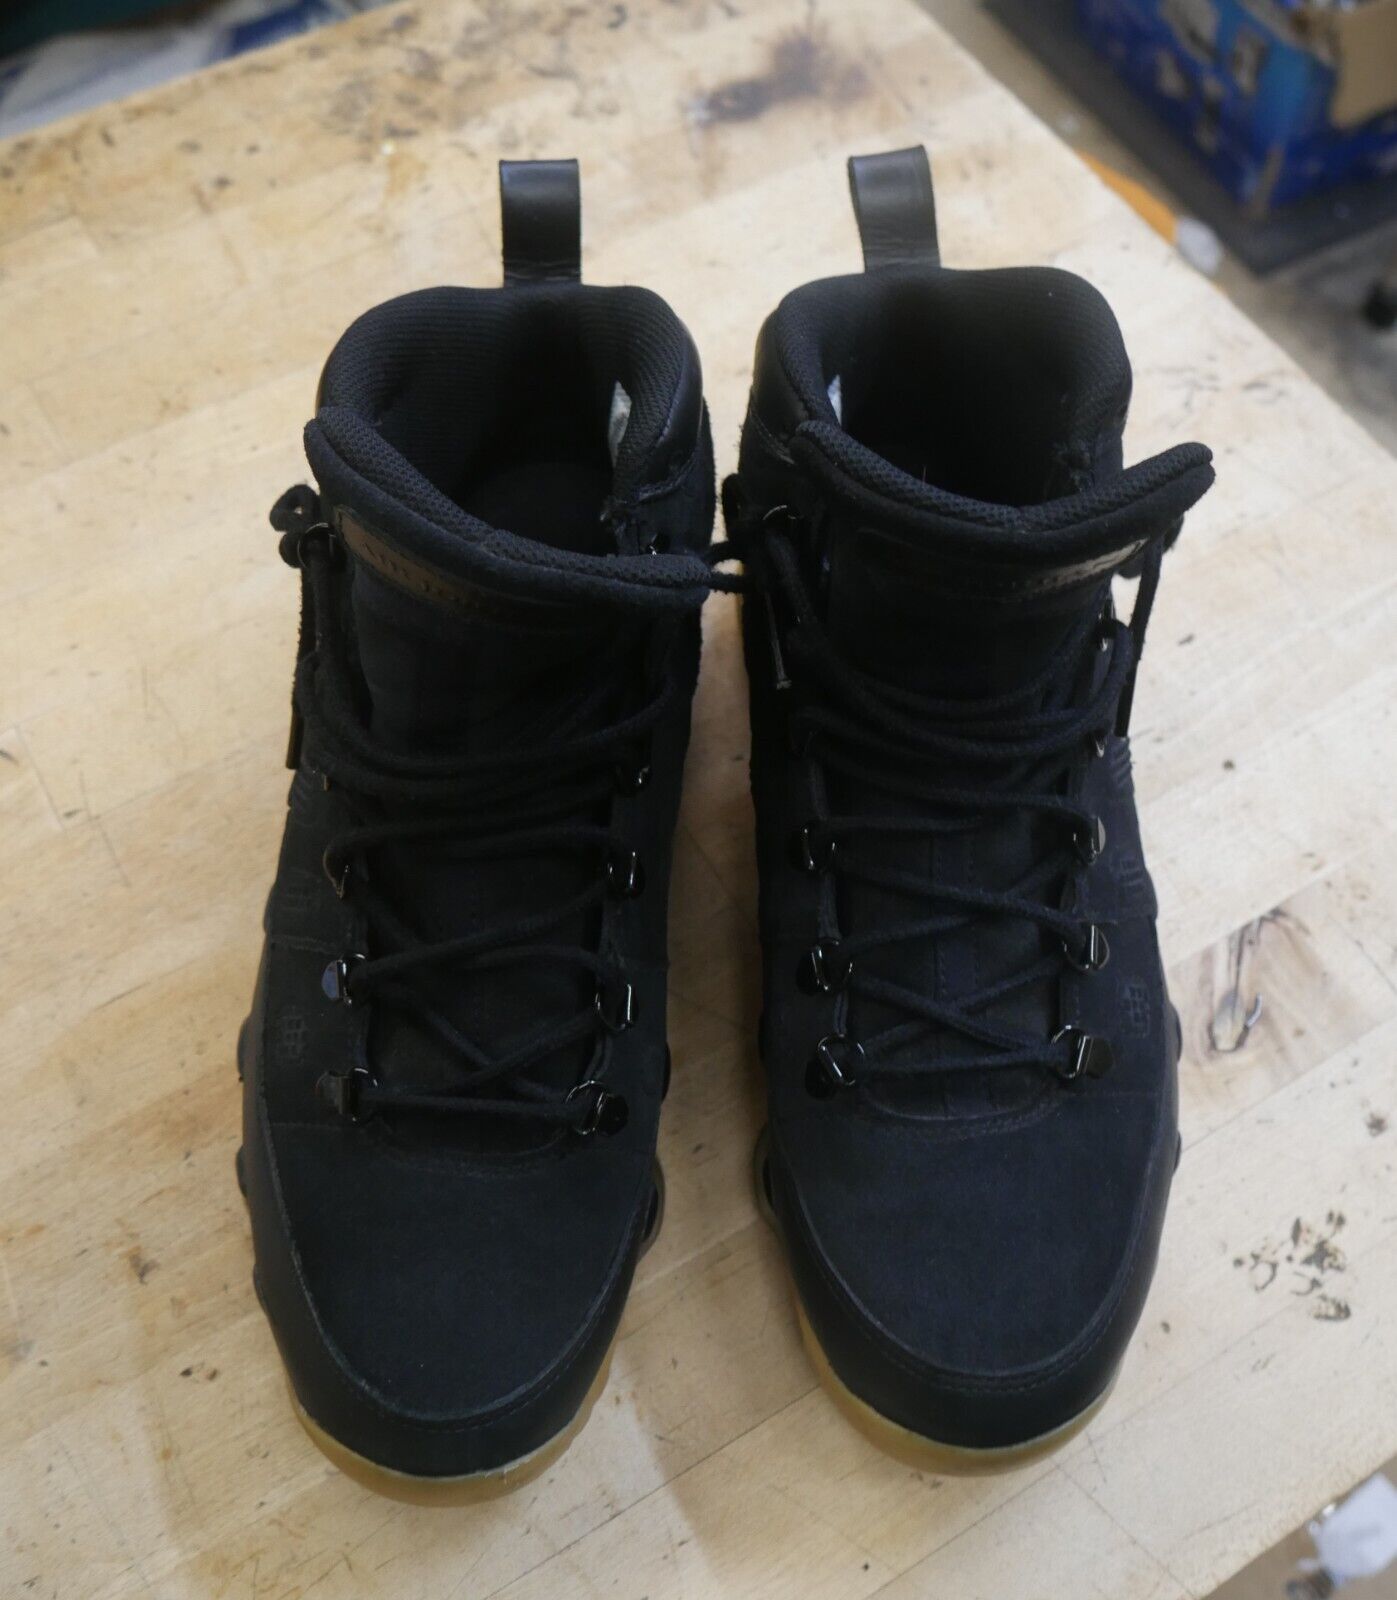 Nike Air Jordan 9 Retro Size 10 Boot NRG Black Gum AR4491-025 PRE OWNED. NO BOX. HAVE SOME STRATCHES.